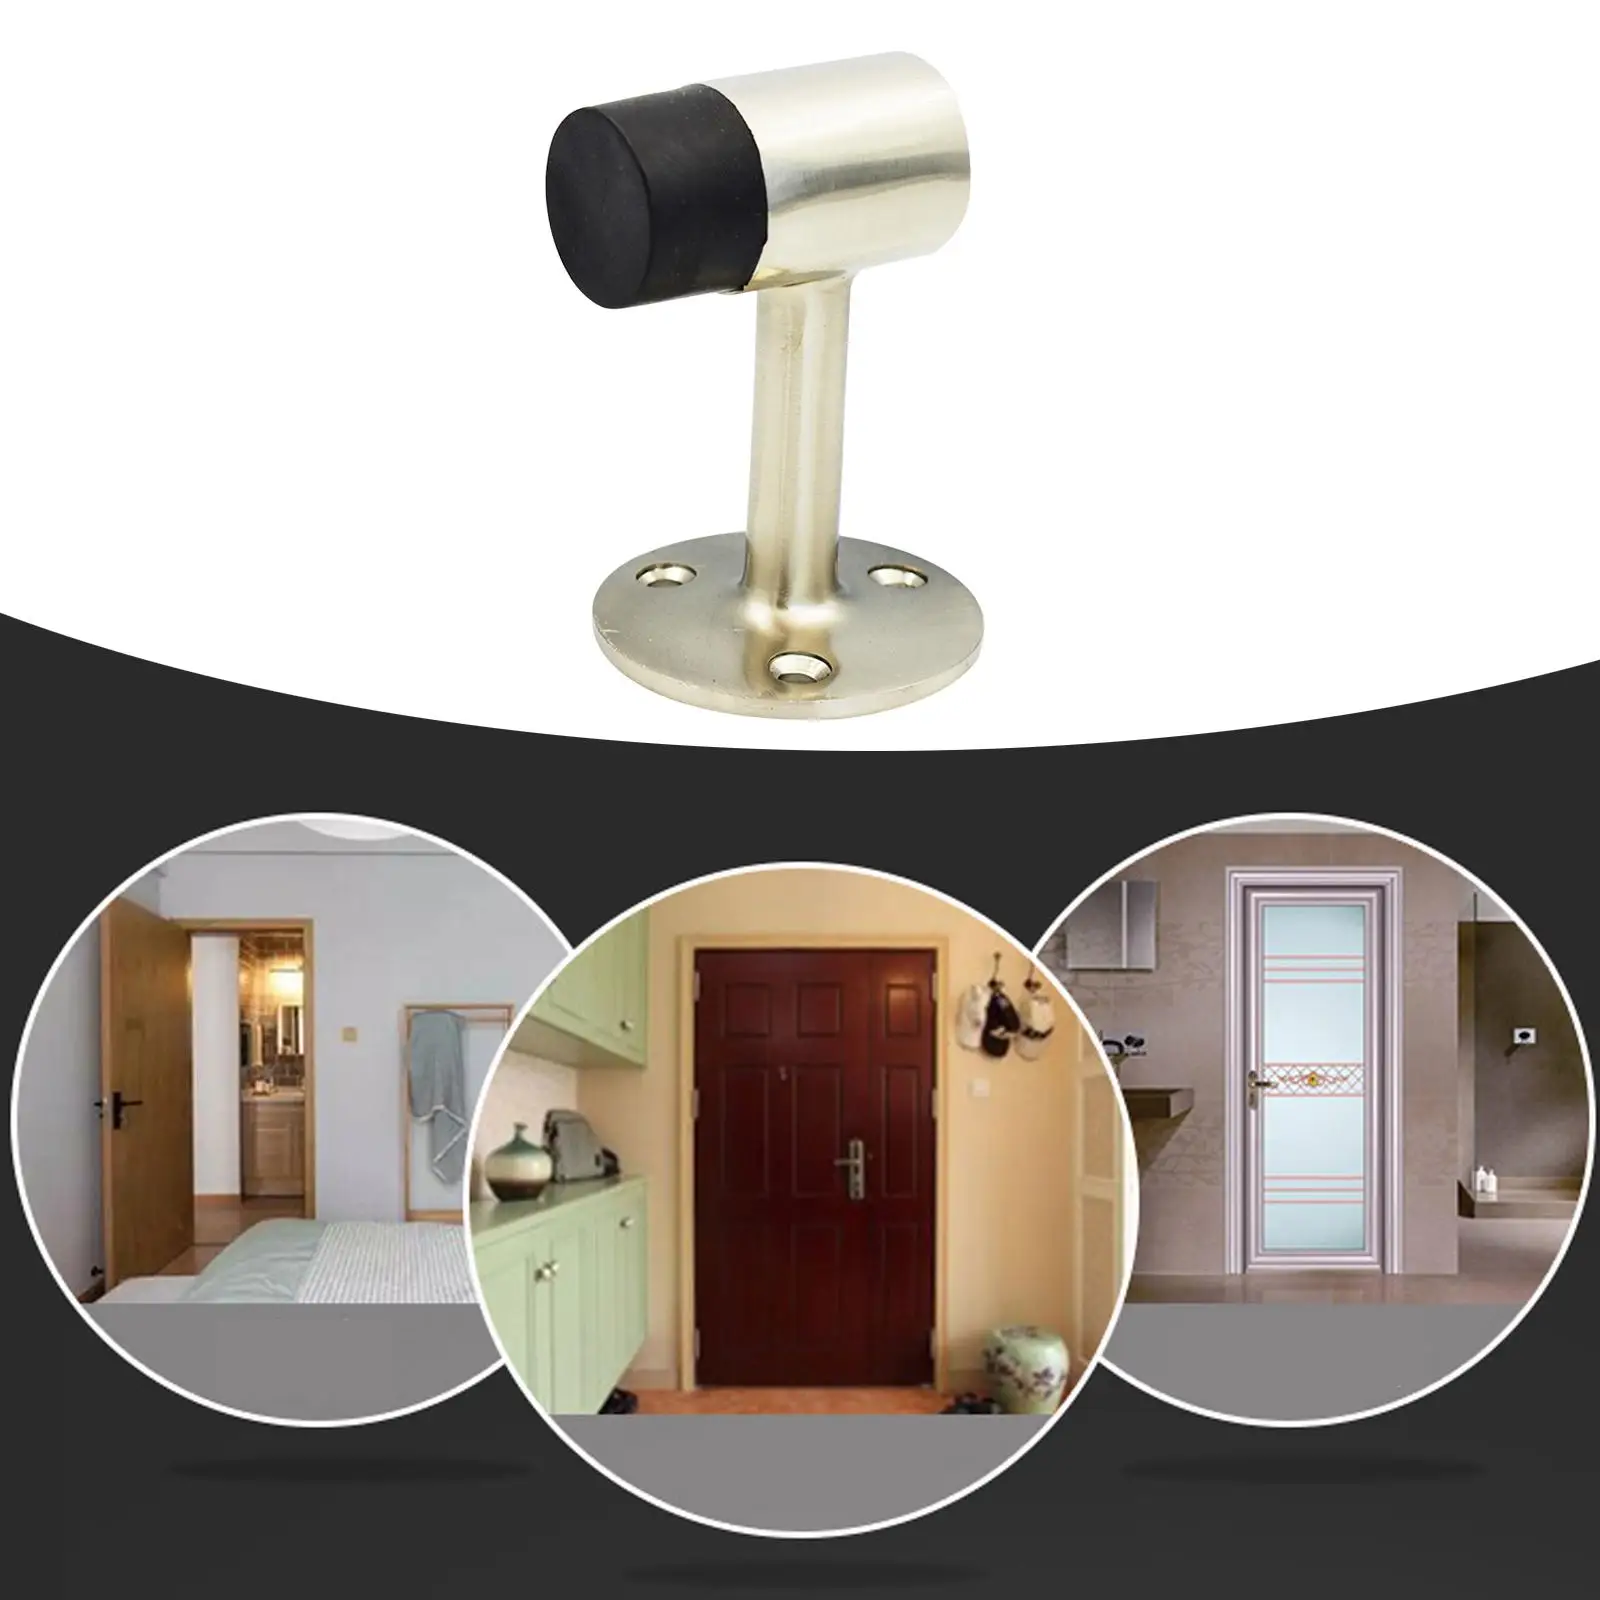 Portable Door Stopper Anti Theft Anti Slip Personal Protection Door Bump Security Device for Women Safety Apartment Home Hotel